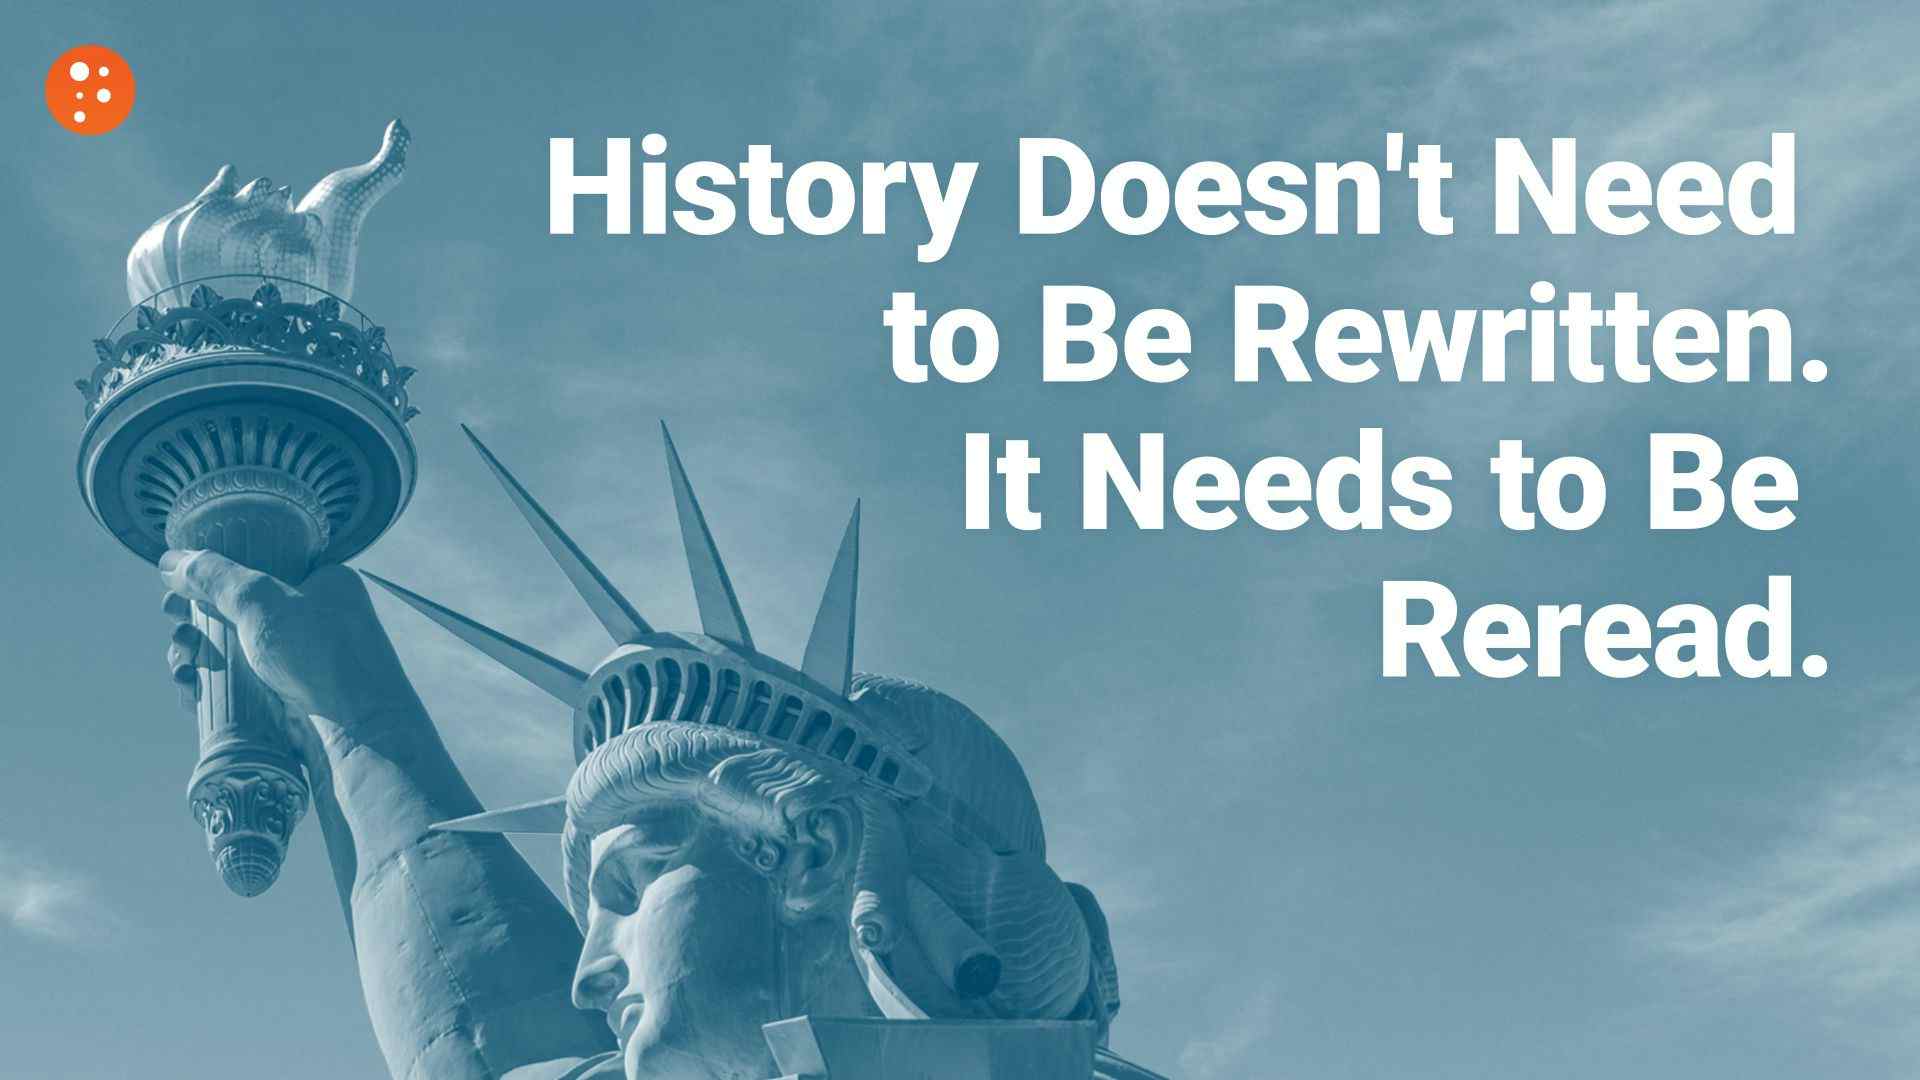 History Doesn't Need to Be Rewritten. It Needs to Be Reread.